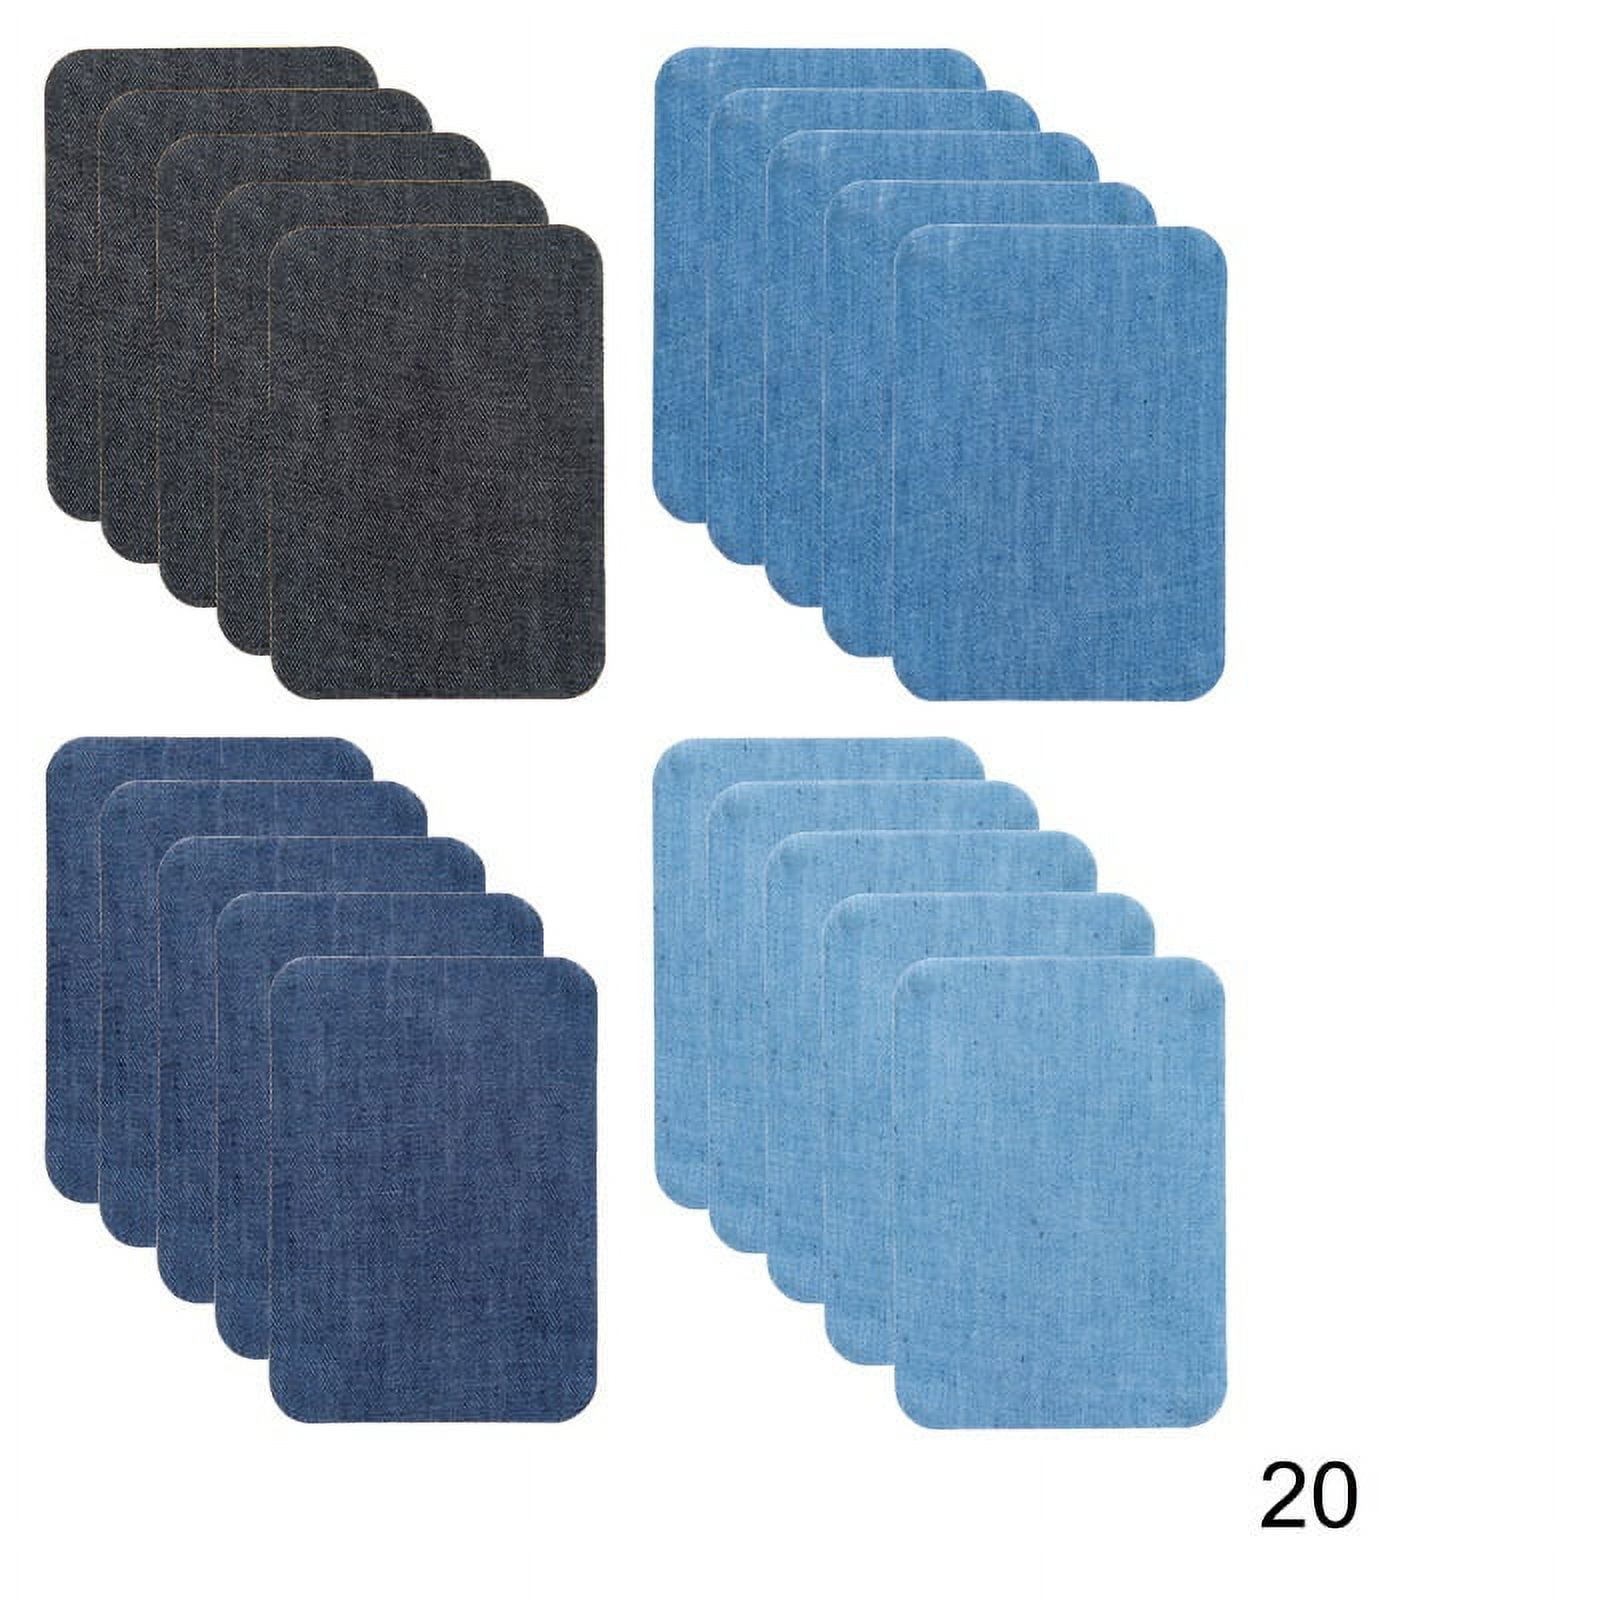 Bulk-buy DIY Cloth Sticker Custom Patches Self Adhesive 100% Cotton Jean  Assorted Shades of Blue Repair Patches Decorating Kit price comparison